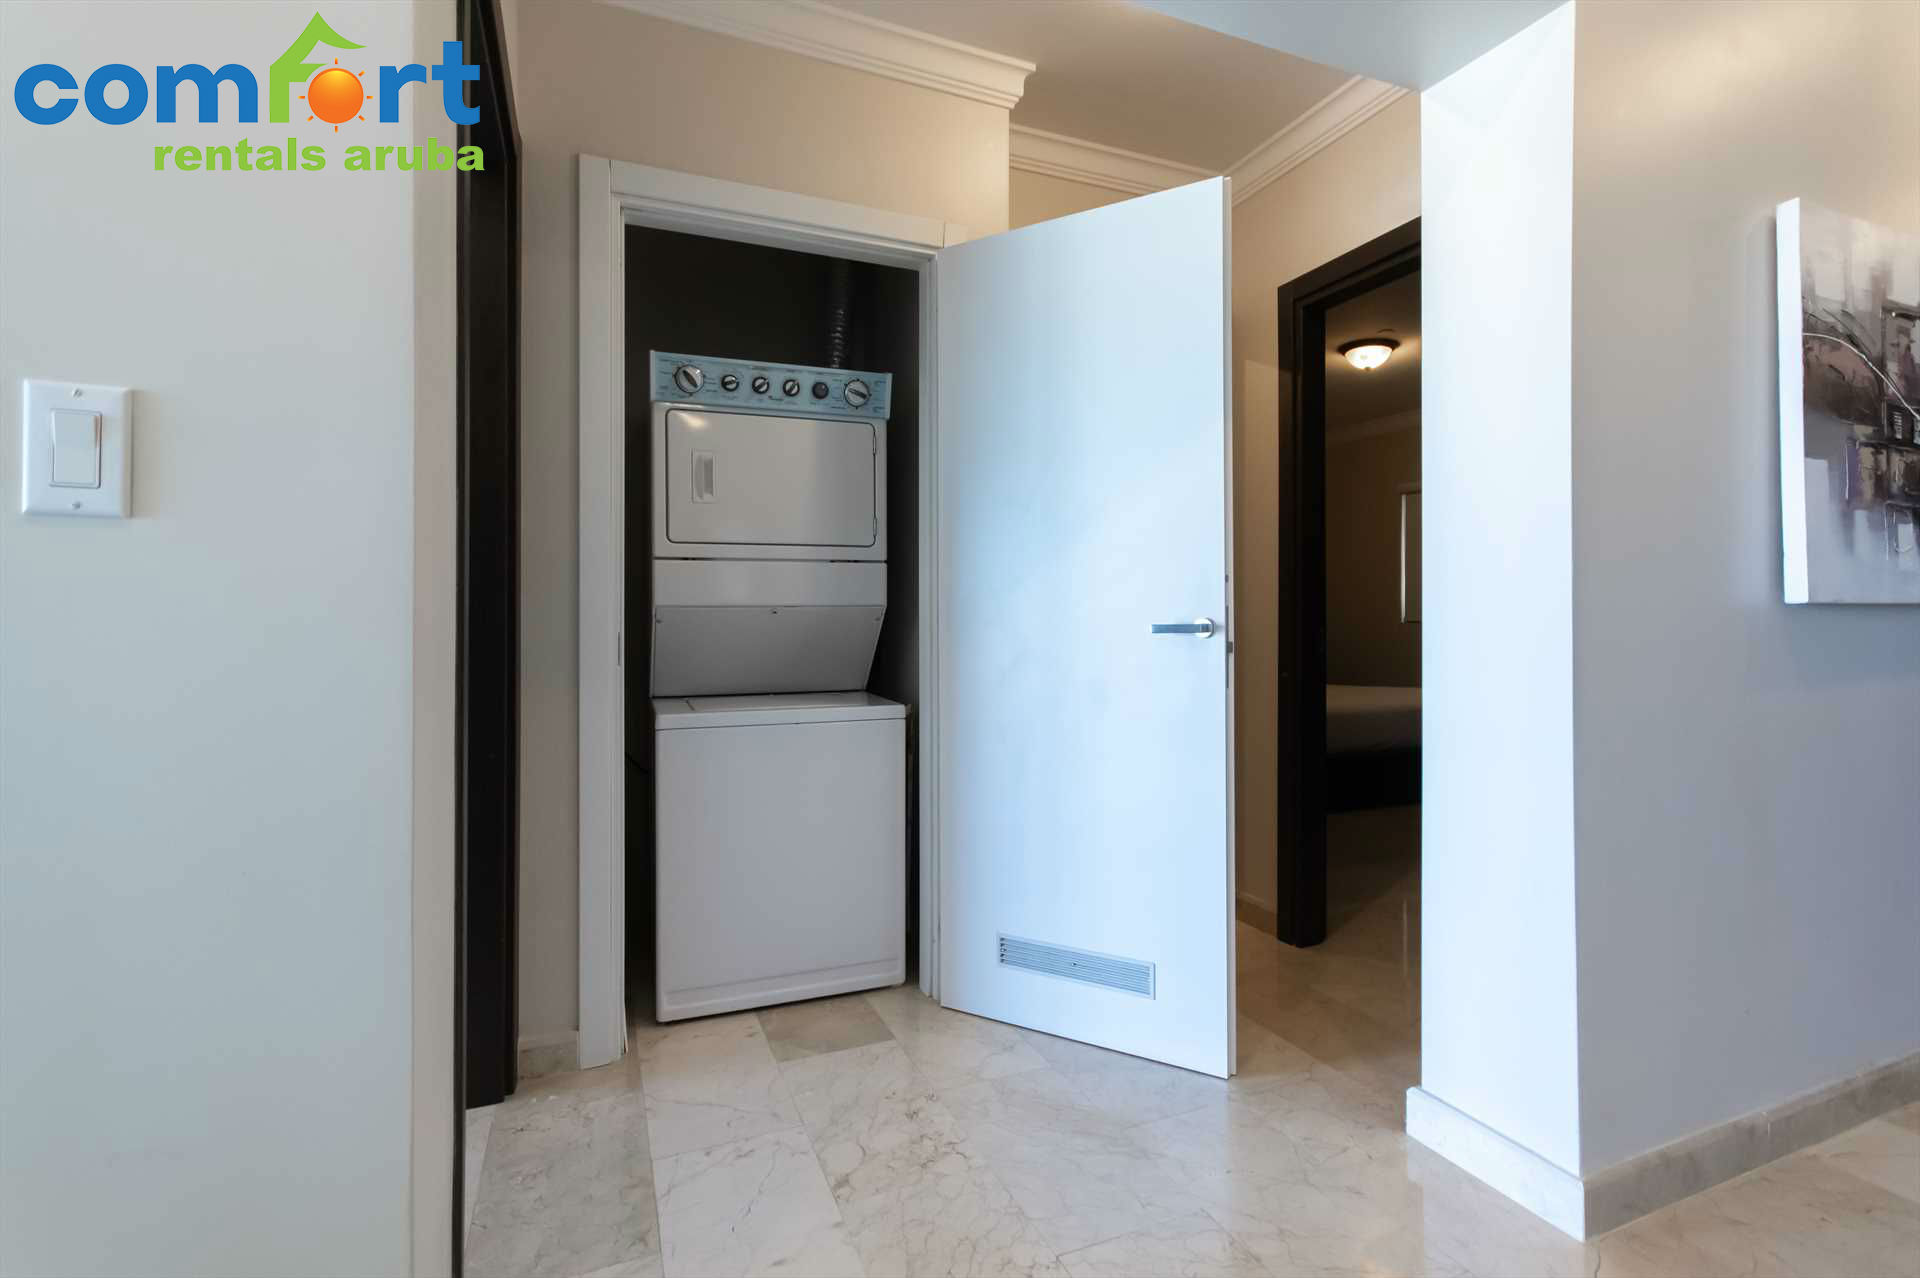 Washer and dryer are conveniently located in the condo